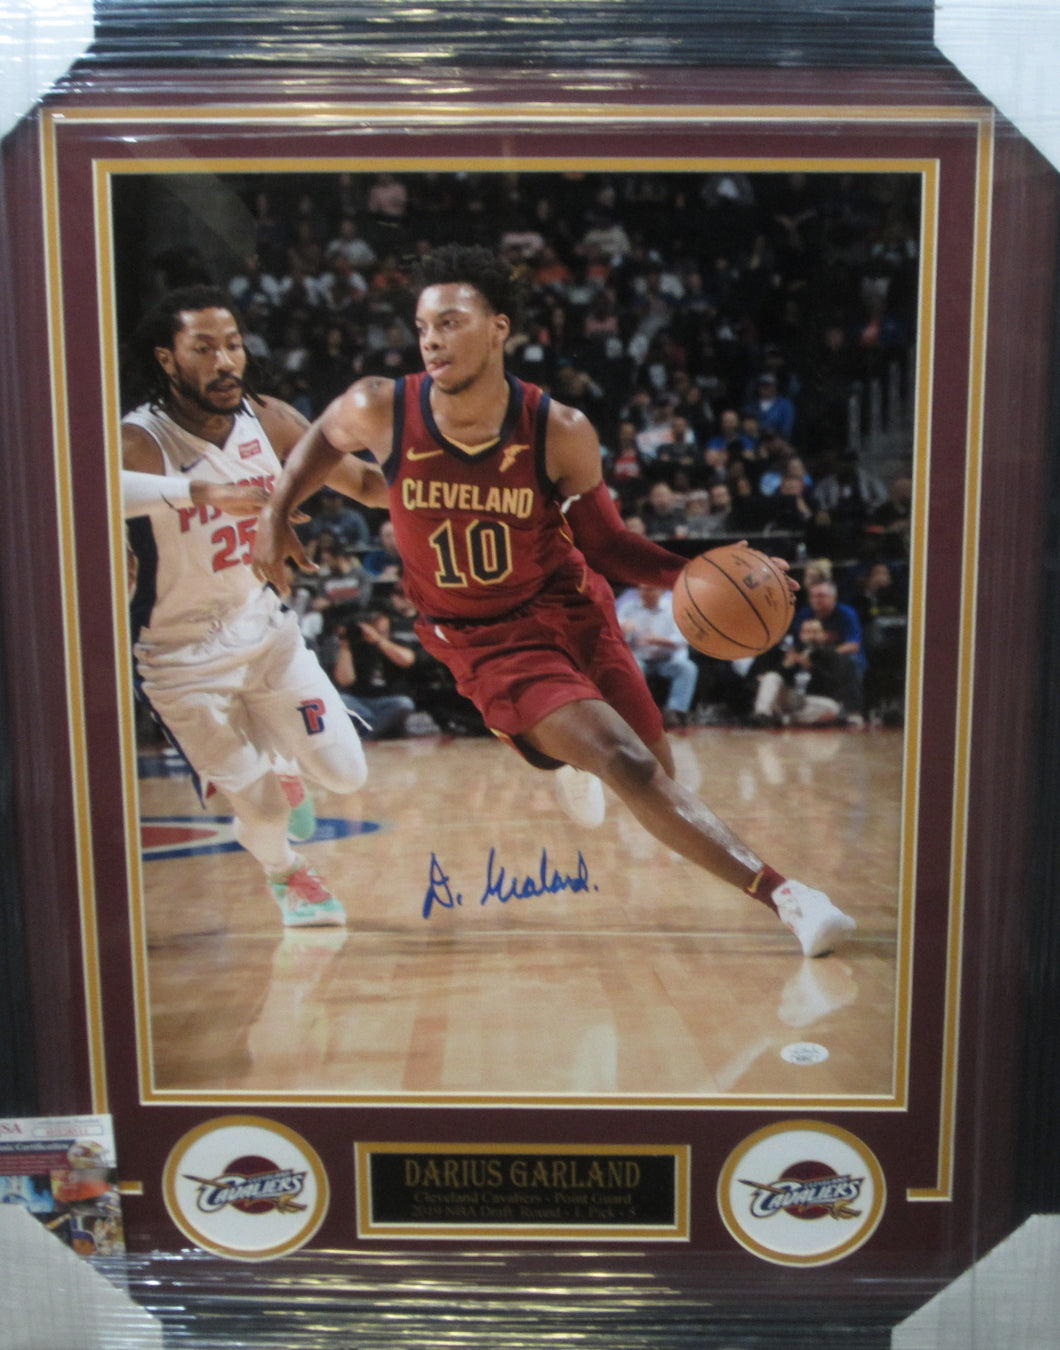 Cleveland Cavaliers Darius Garland SIGNED Framed Matted 16x20 Photo With JSA COA